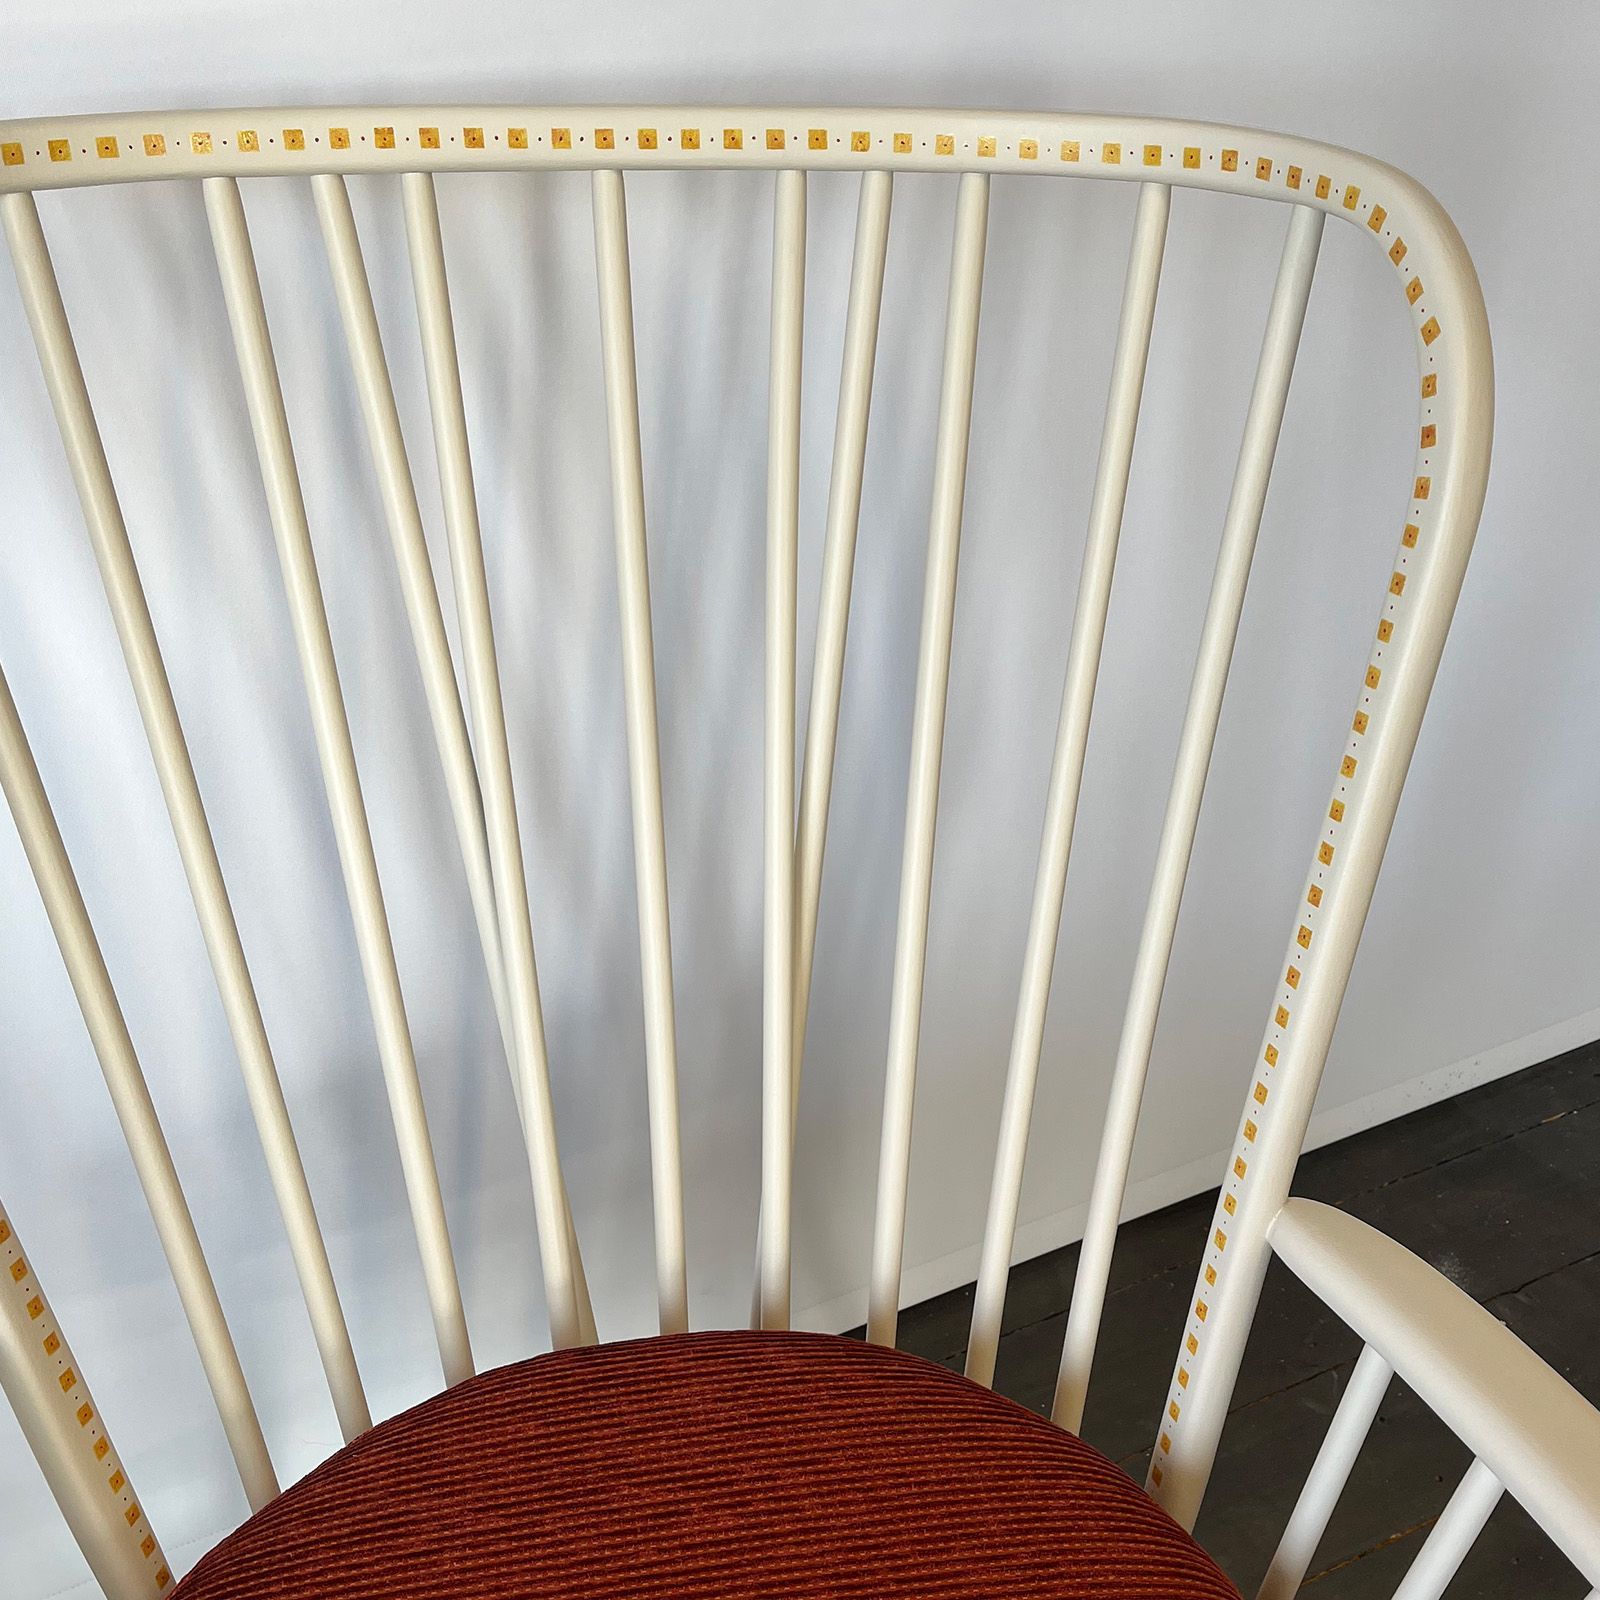 Design detail on Ercol Spindle Chair